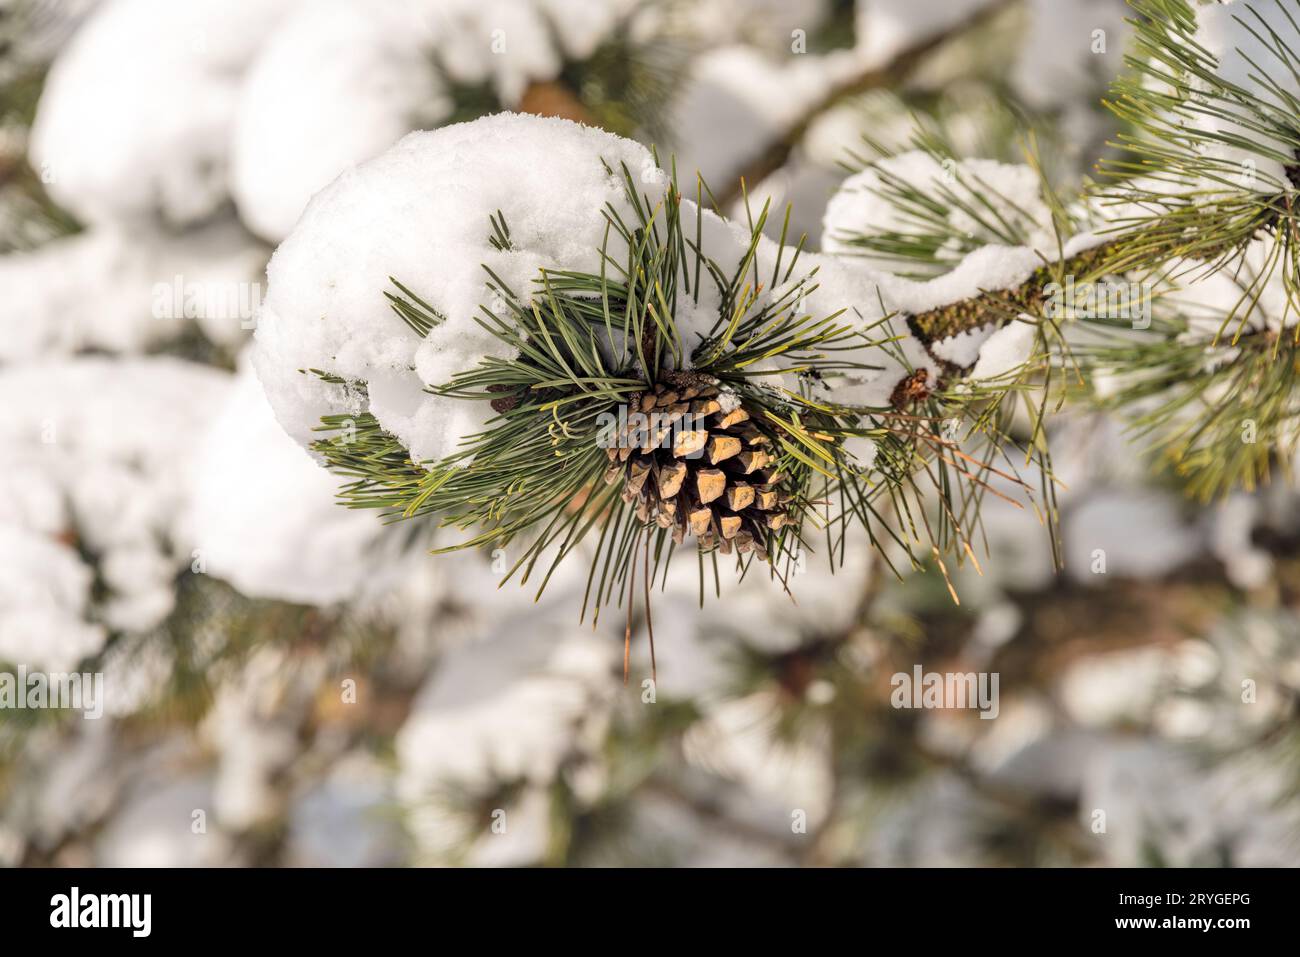 Fir tree cone on a branch covered with snow Stock Photo